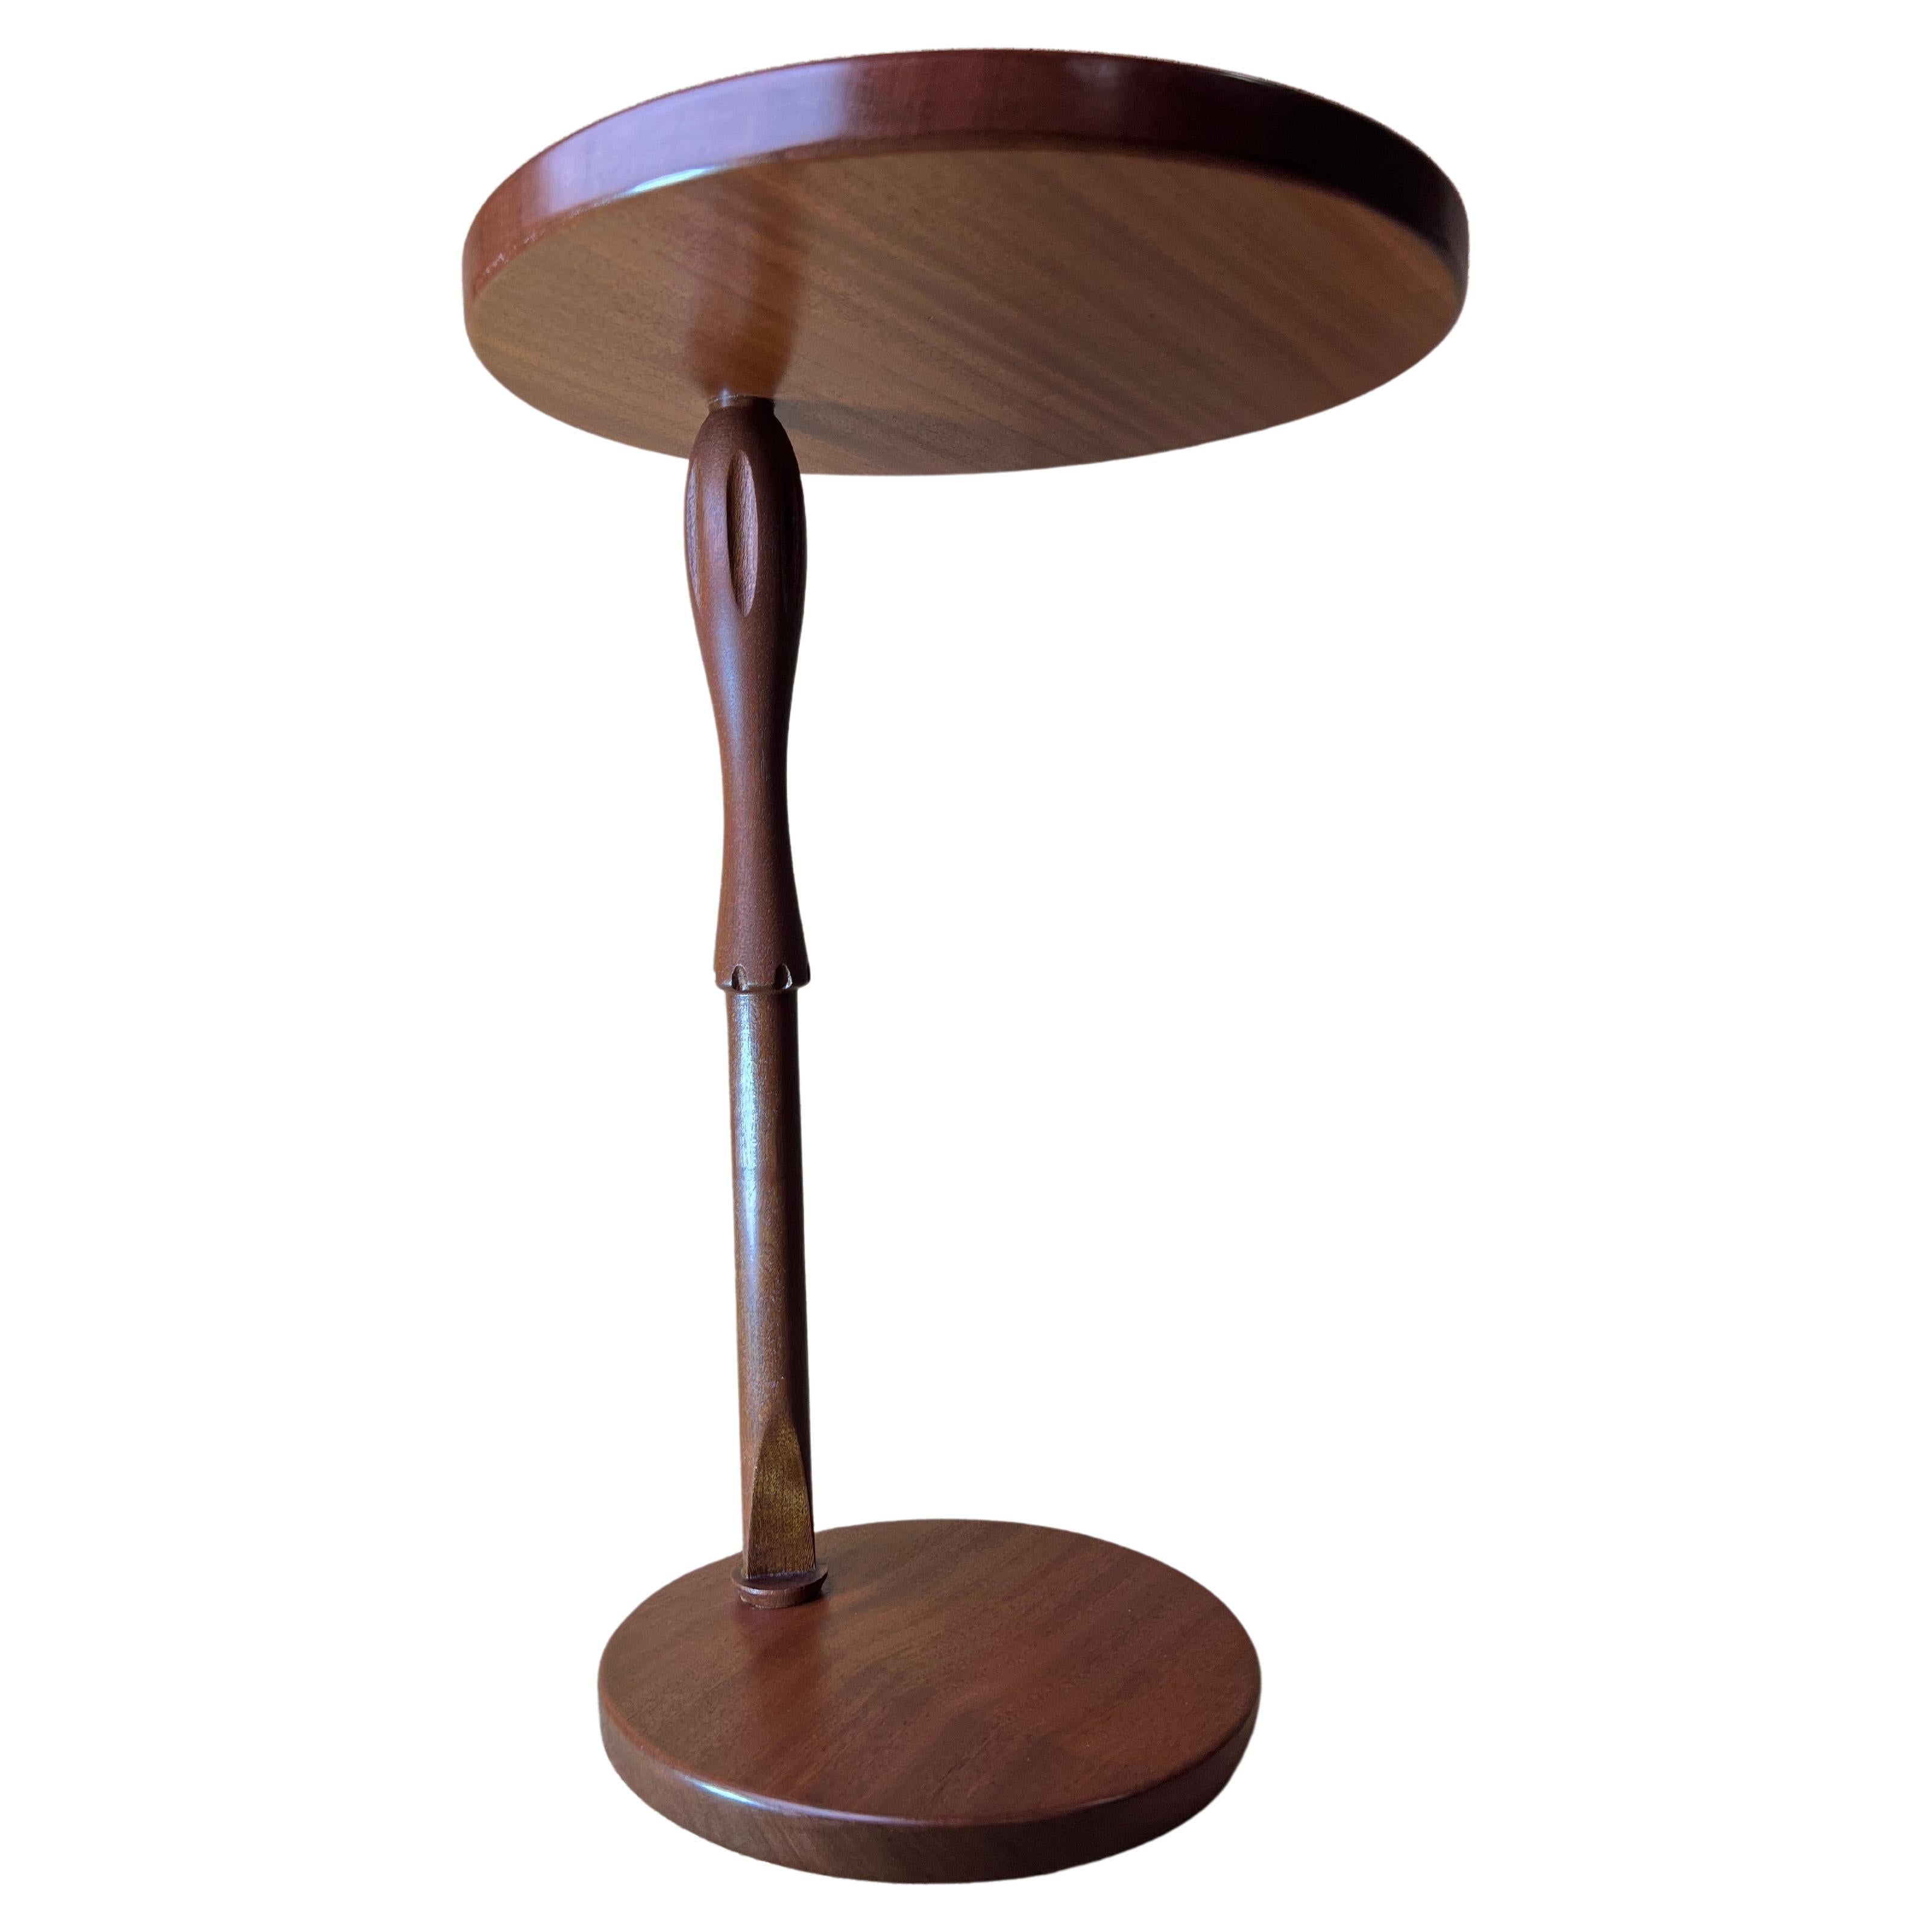 Modern Couch Side Table from Solid Sapele wood C shaped slideable table in stock